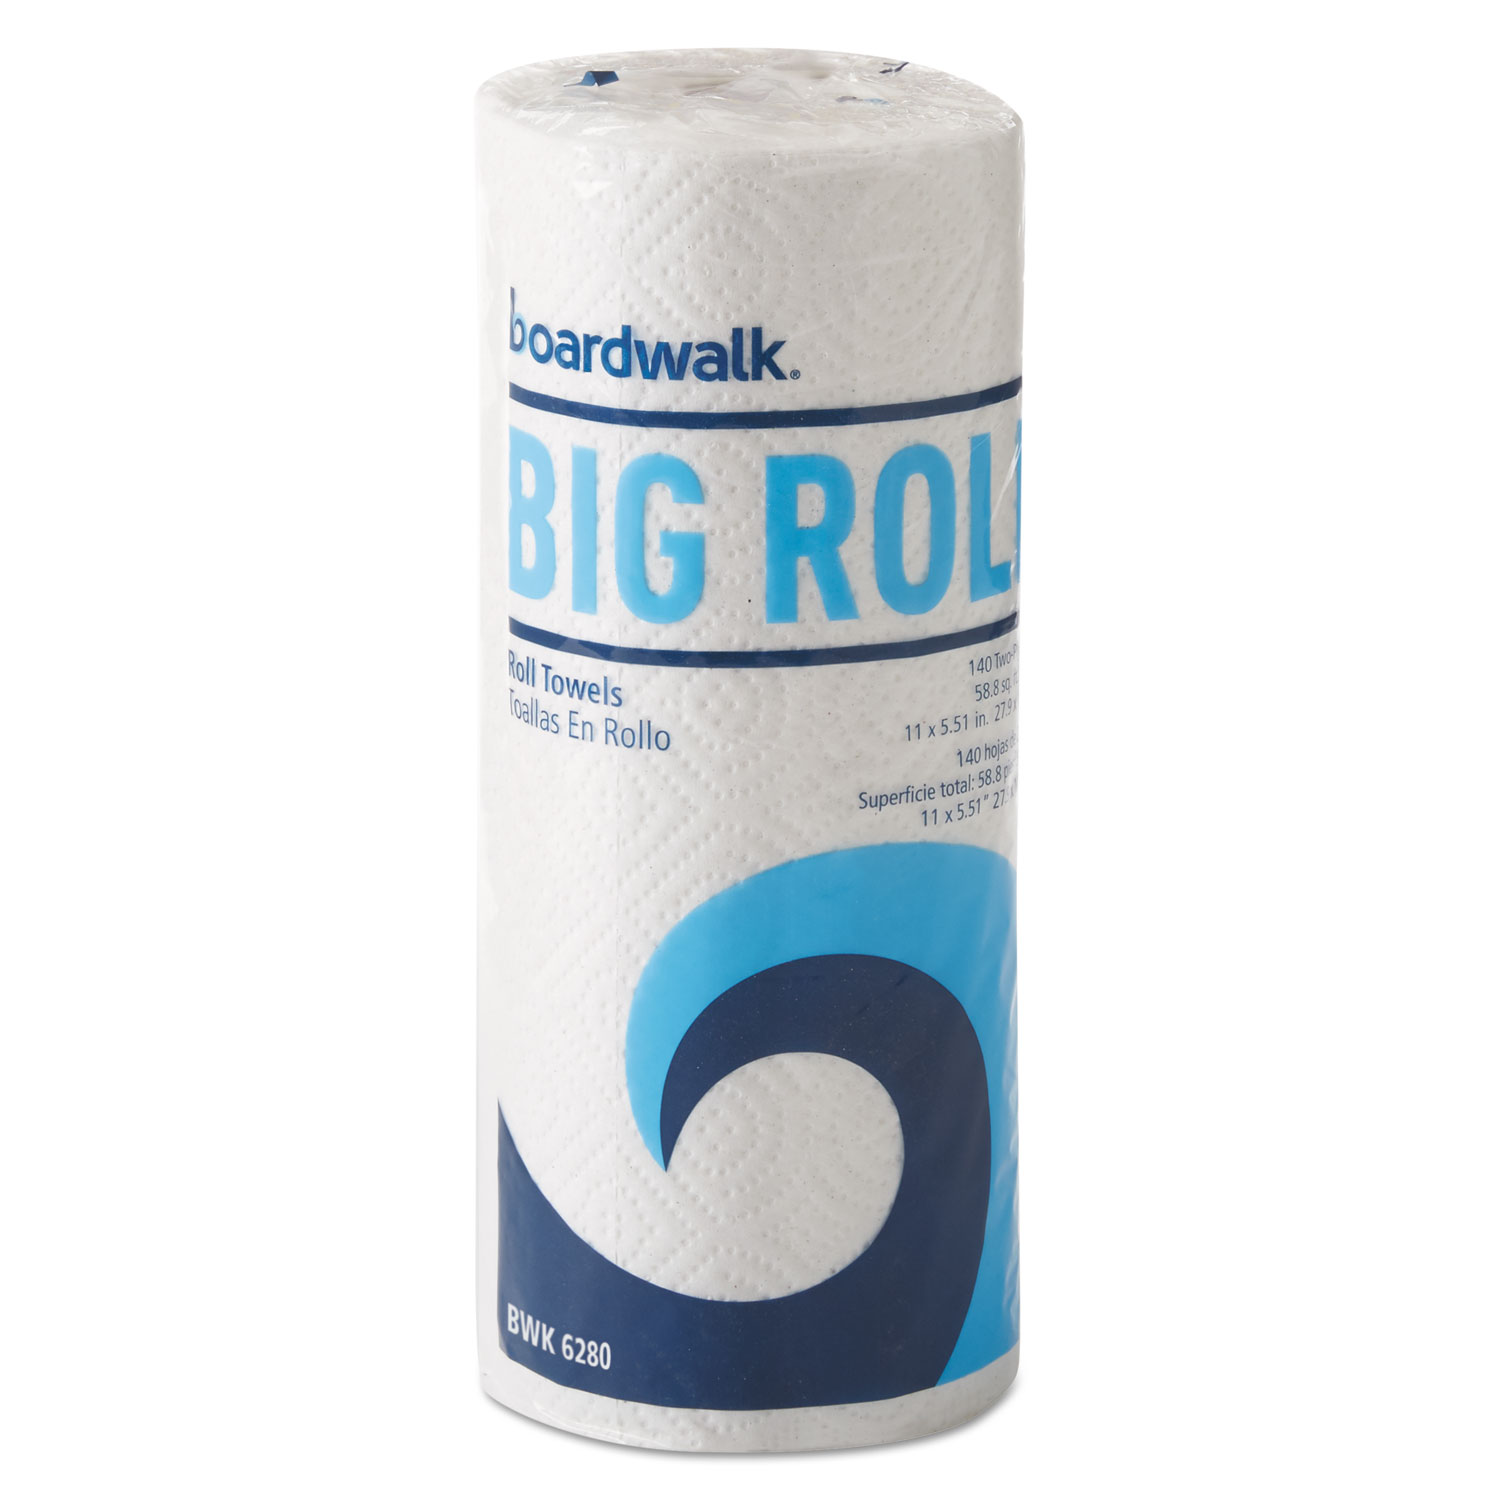  Boardwalk 6280 Office Packs Perforated Paper Towel Rolls, 2-Ply, White, 5.5x11,140/Roll,12/Ct (BWK6280) 